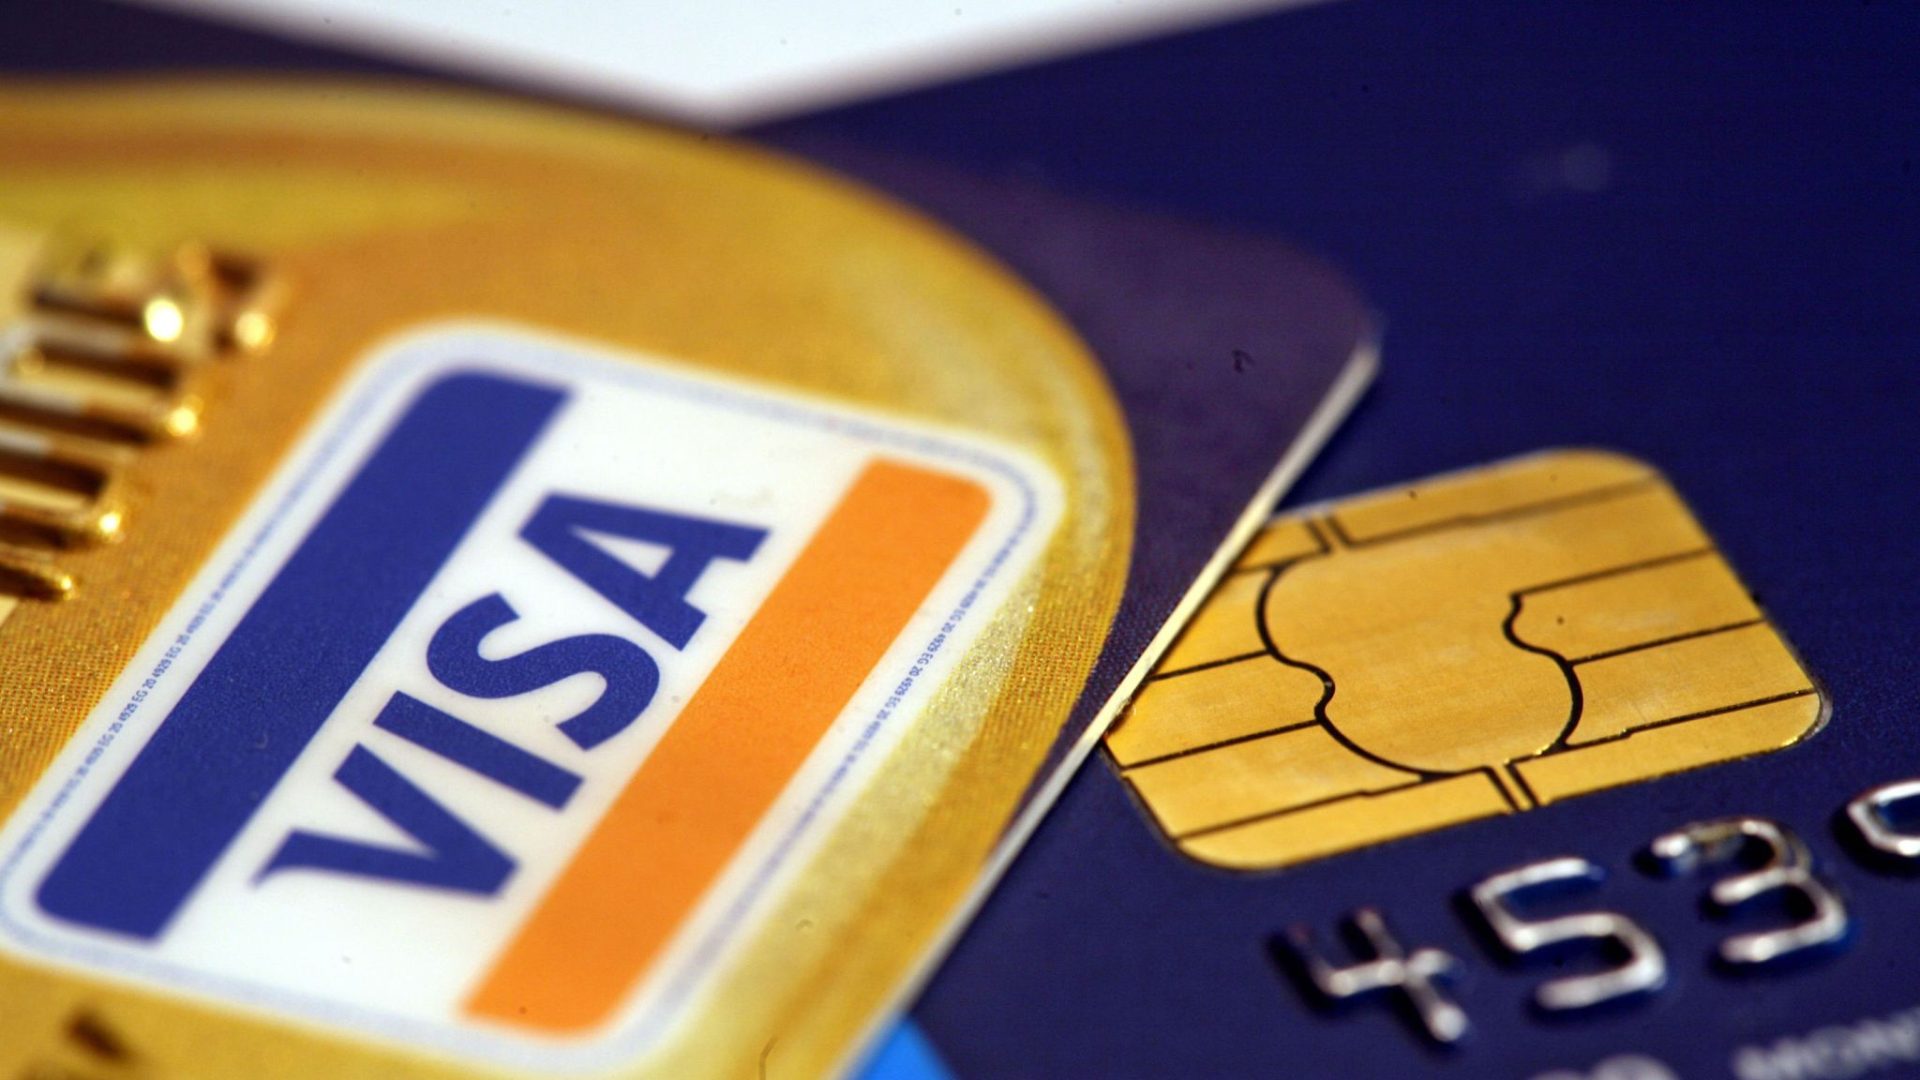 Amazon to stop accepting UK Visa credit card payments from January 2022